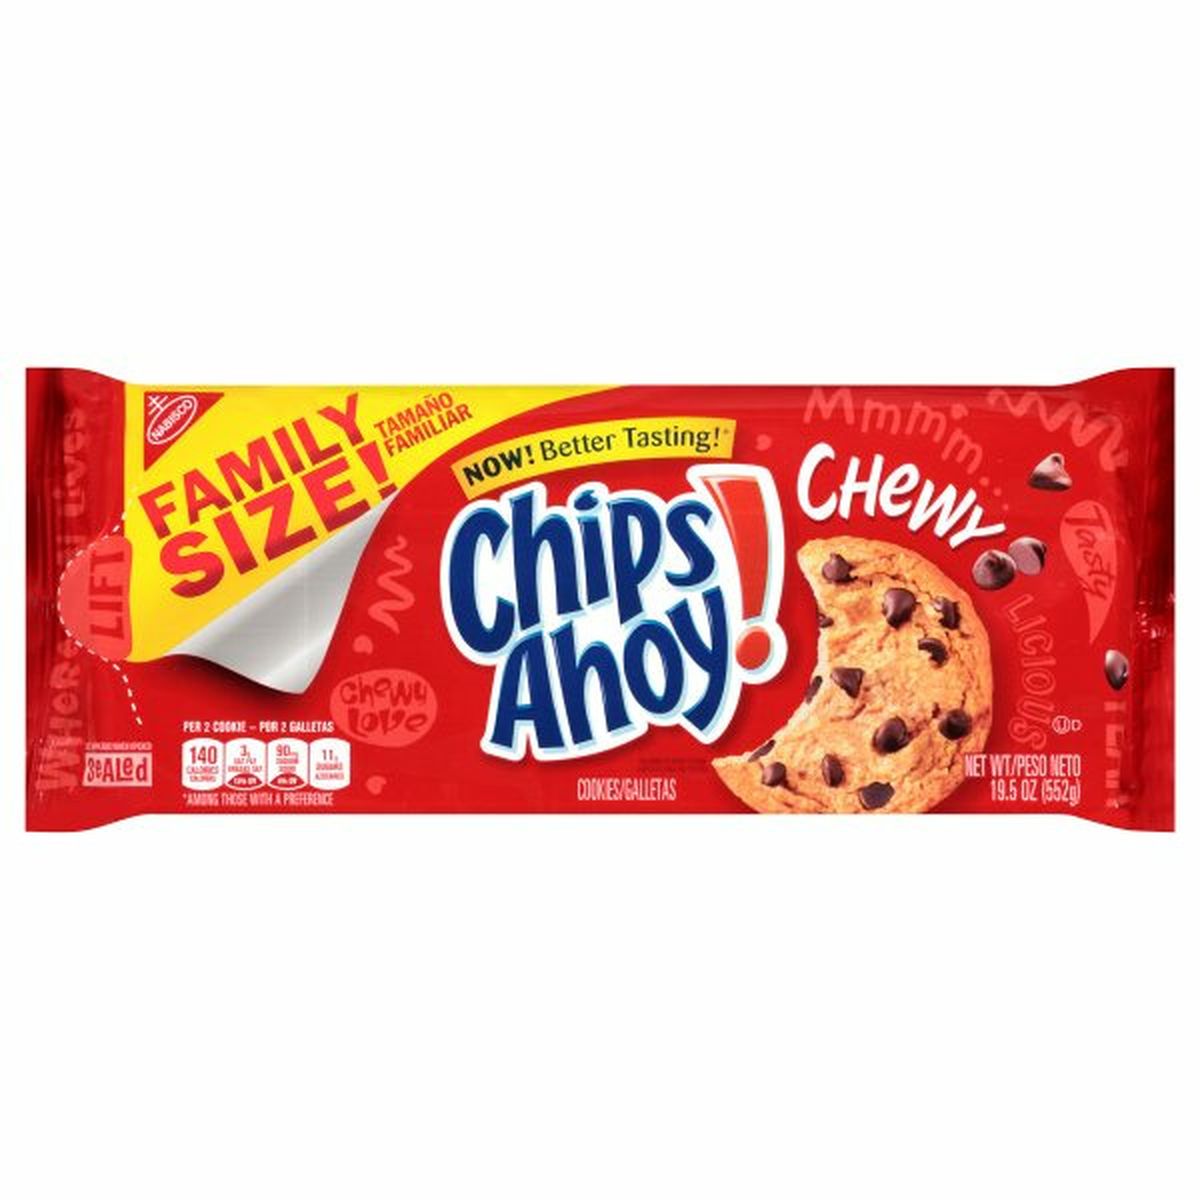 Calories in Chips Ahoy! Cookies, Chewy, Family Size